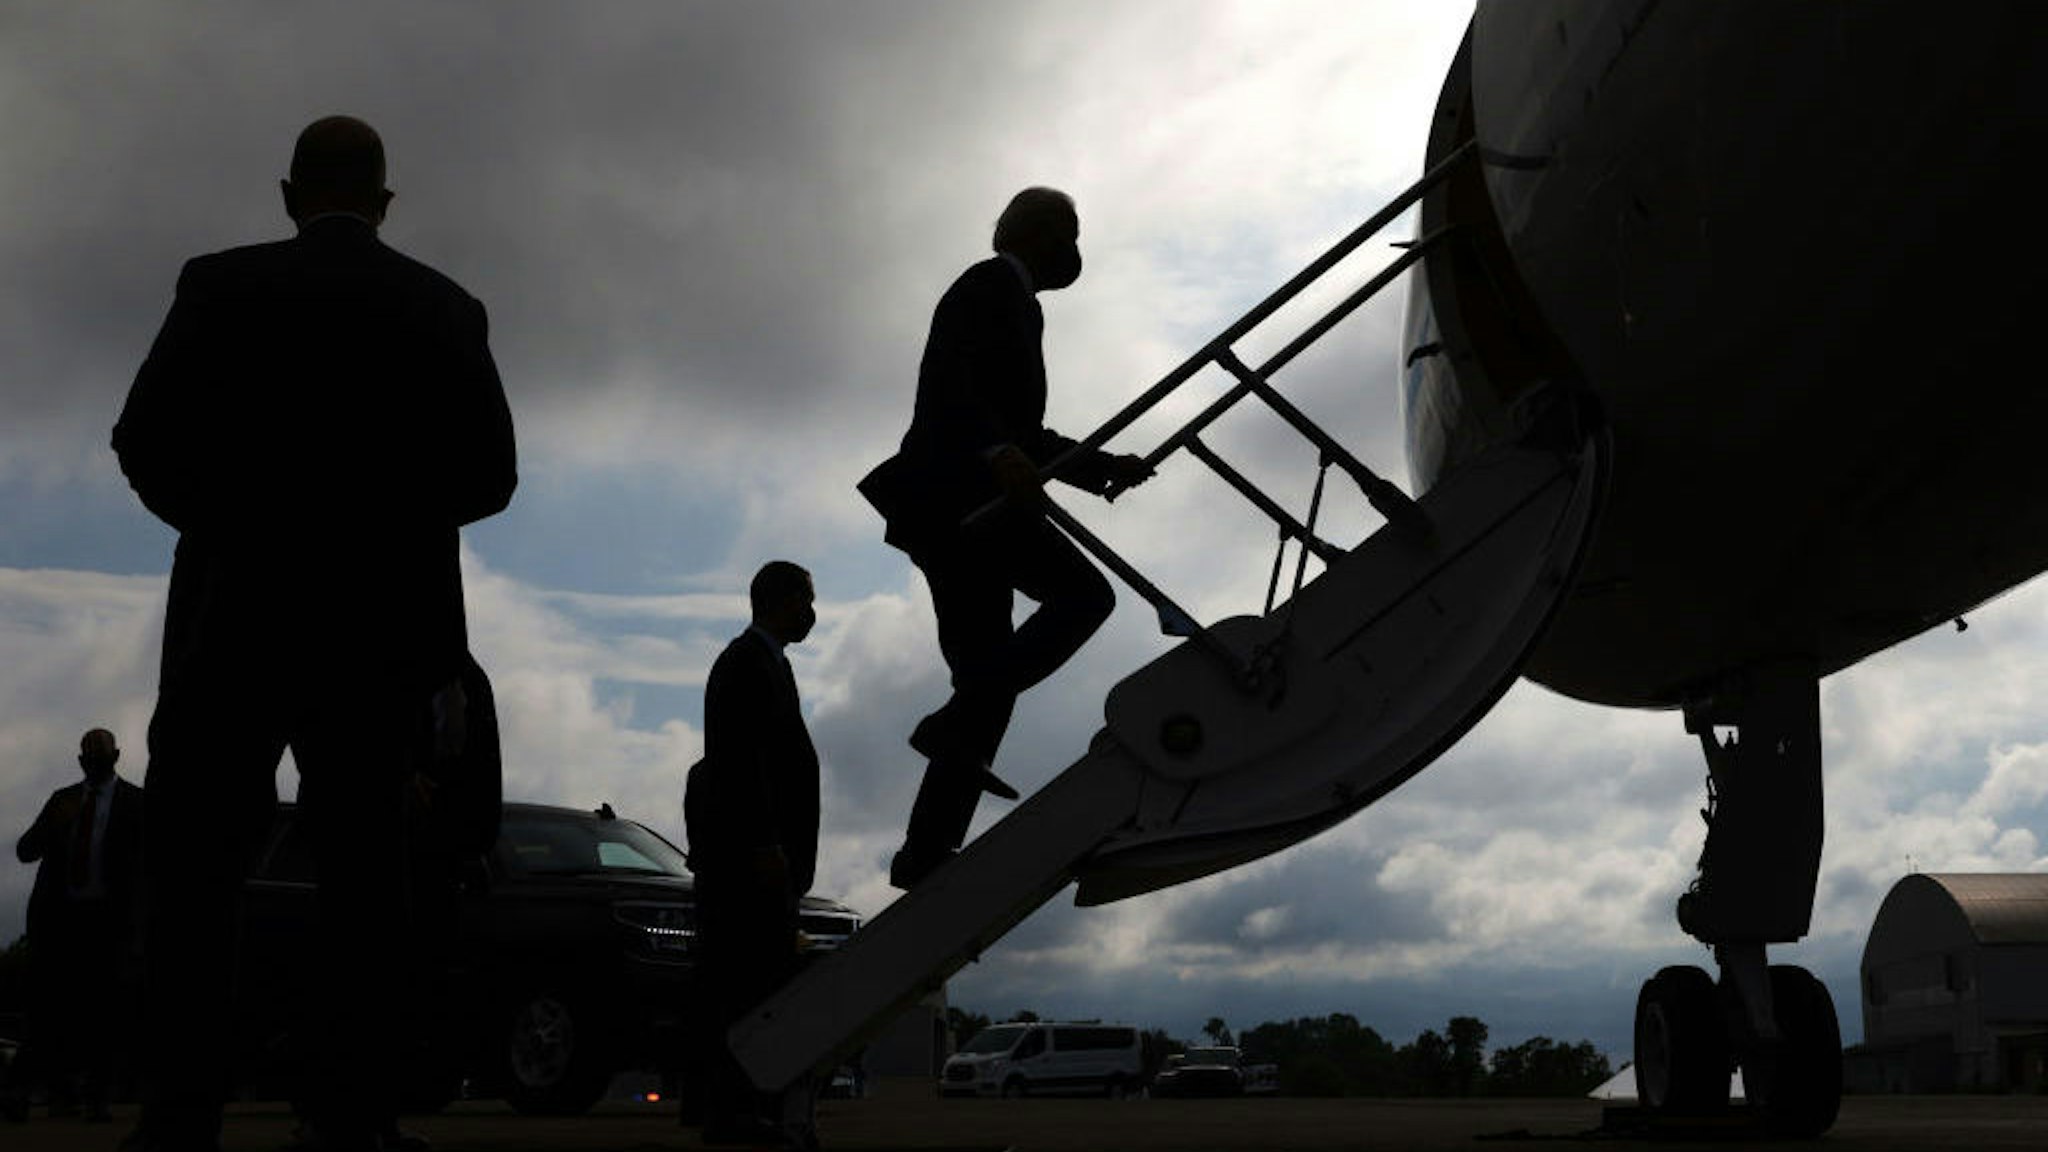 Democratic presidential candidate former Vice President Joe Biden boards a plane at Allegheny County Airport on August 31, 2020 in West Mifflin, Pennsylvania. Biden criticized President Trump’s response to protests in Kenosha, Wisconsin and Portland, Oregon earlier today at a campaign event in Pittsburgh, Pennsylvania. (Photo by Alex Wong/Getty Images)